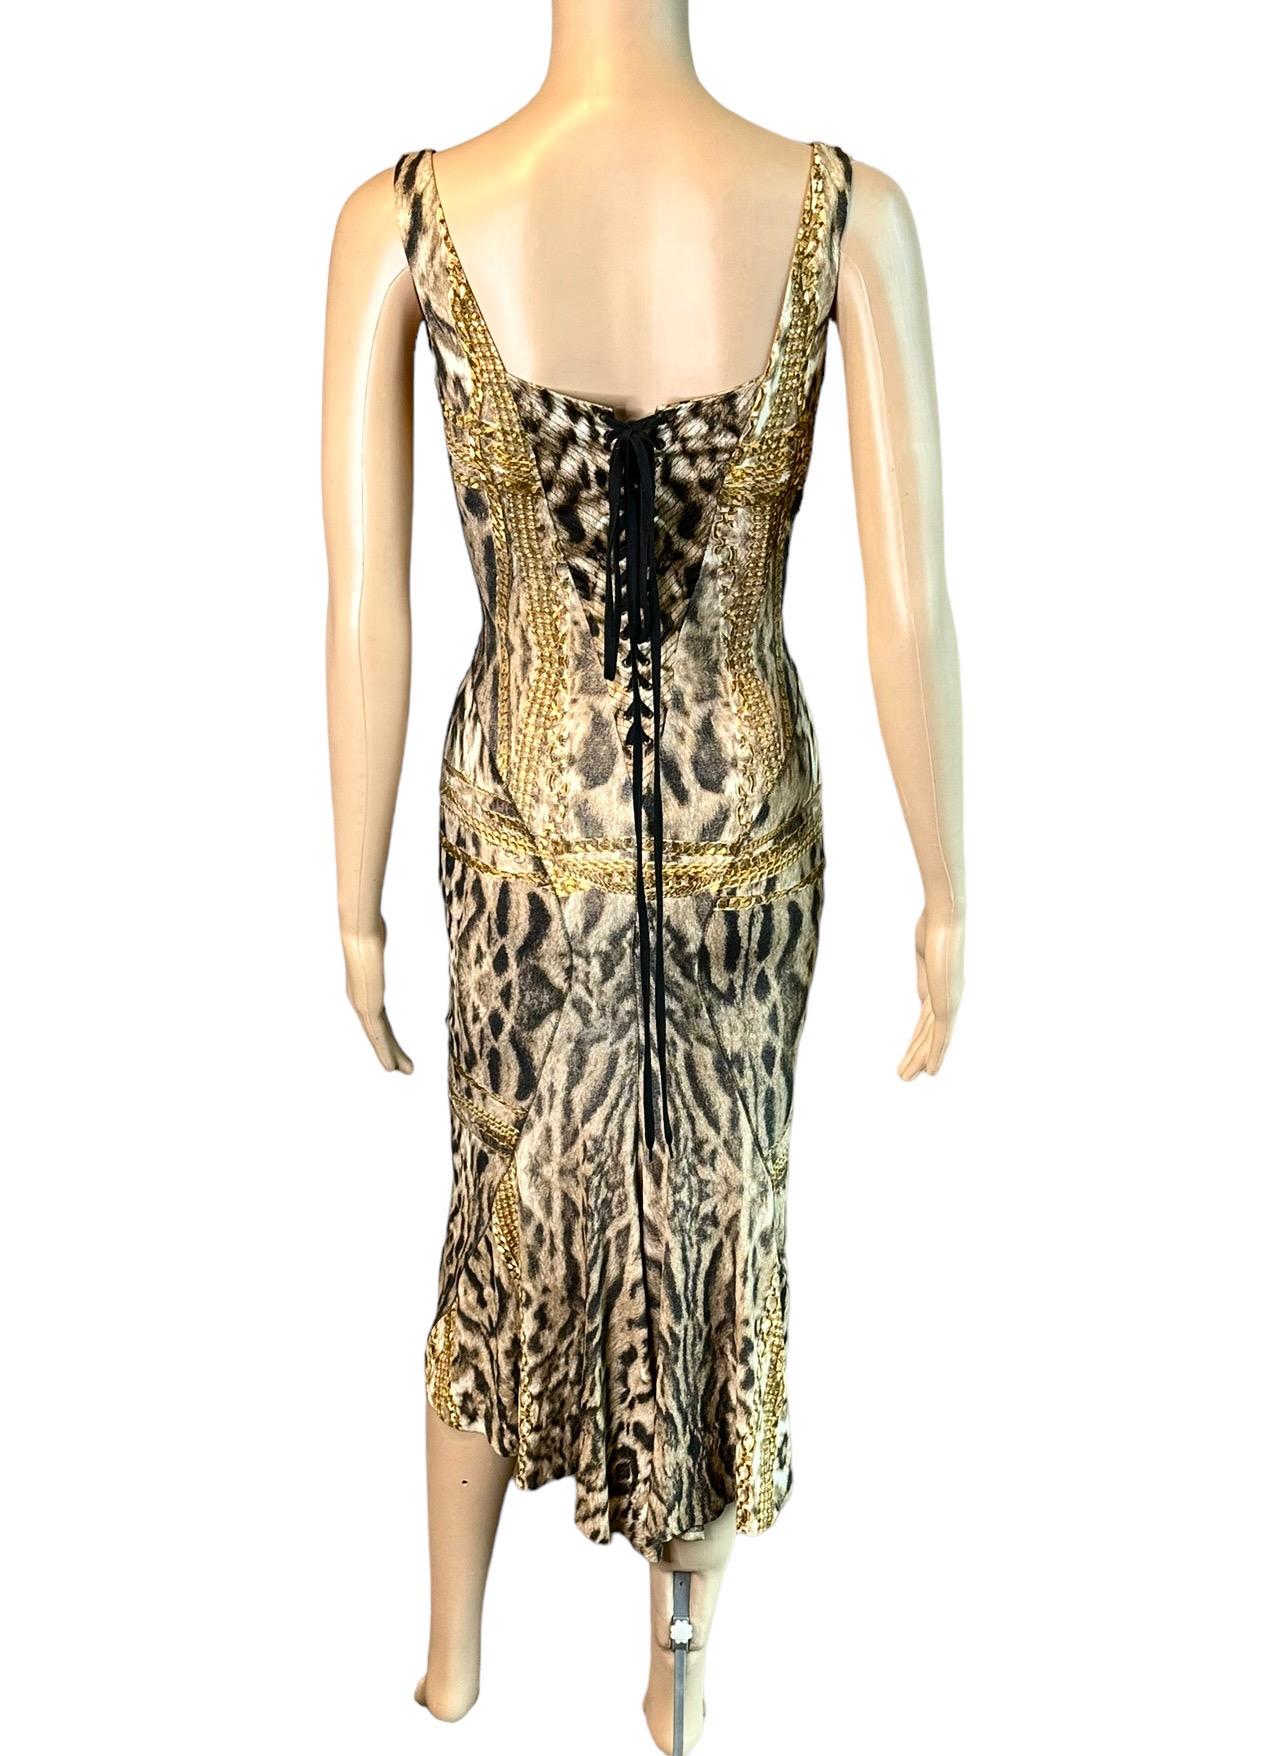 Roberto Cavalli F/W 2003 Bustier Corset Lace Up Animal Chain Print Silk Dress For Sale 2